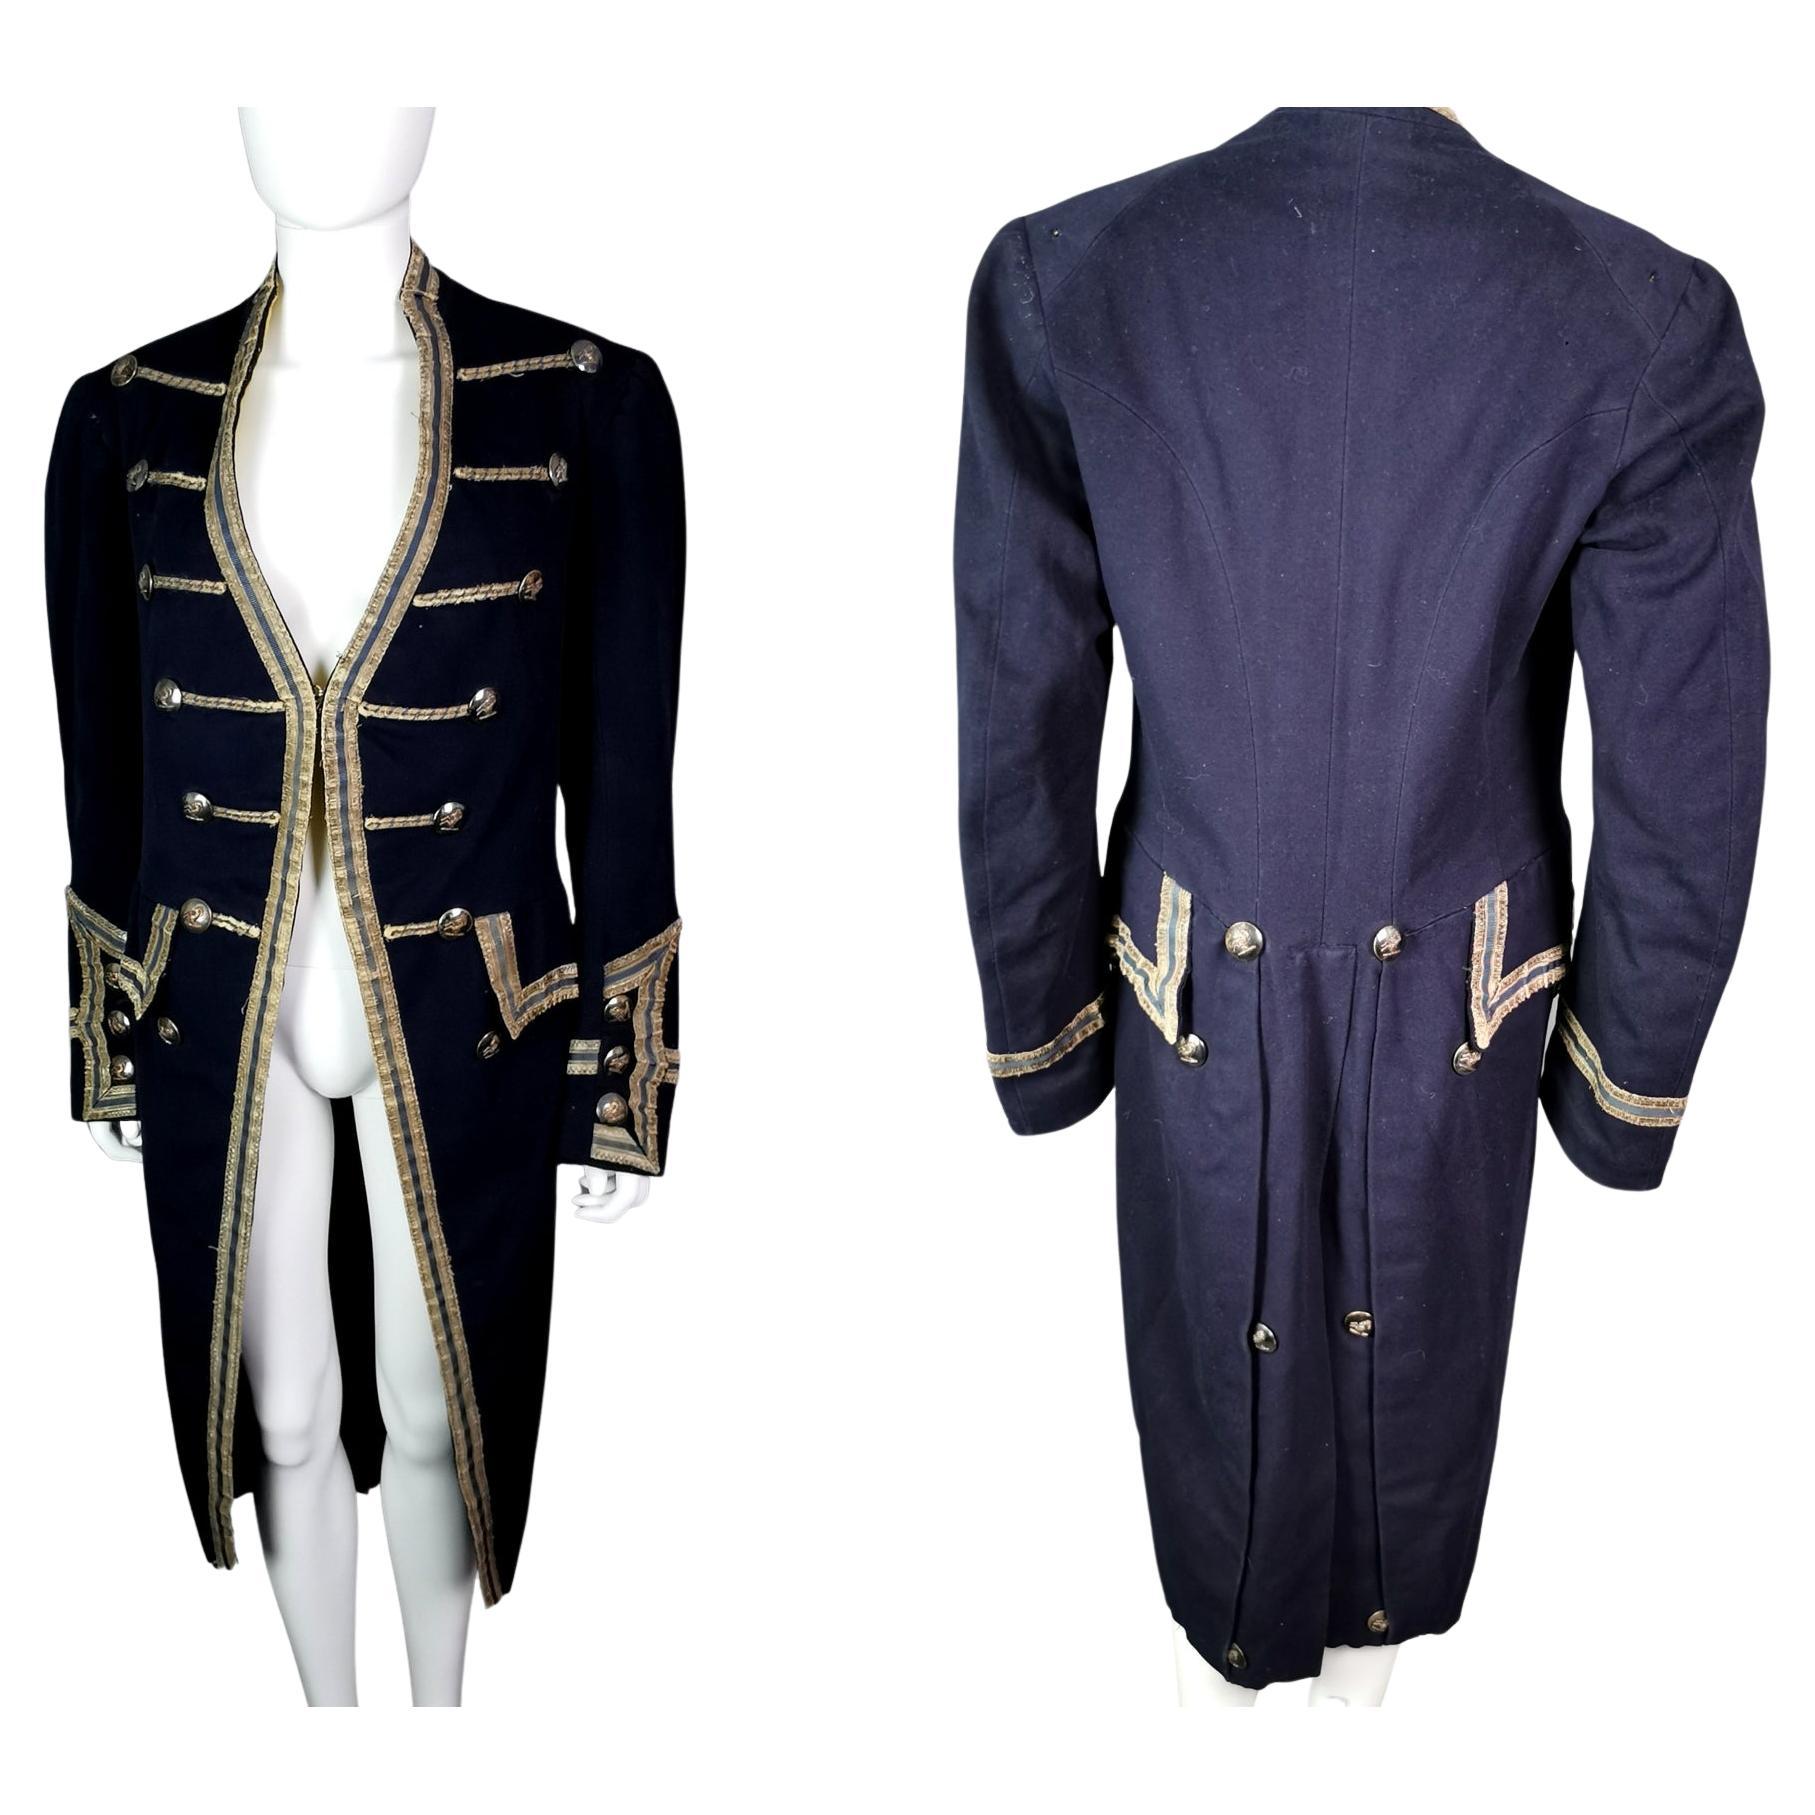 Antique theatrical costume, 18th century military style frock coat, Edwardian 